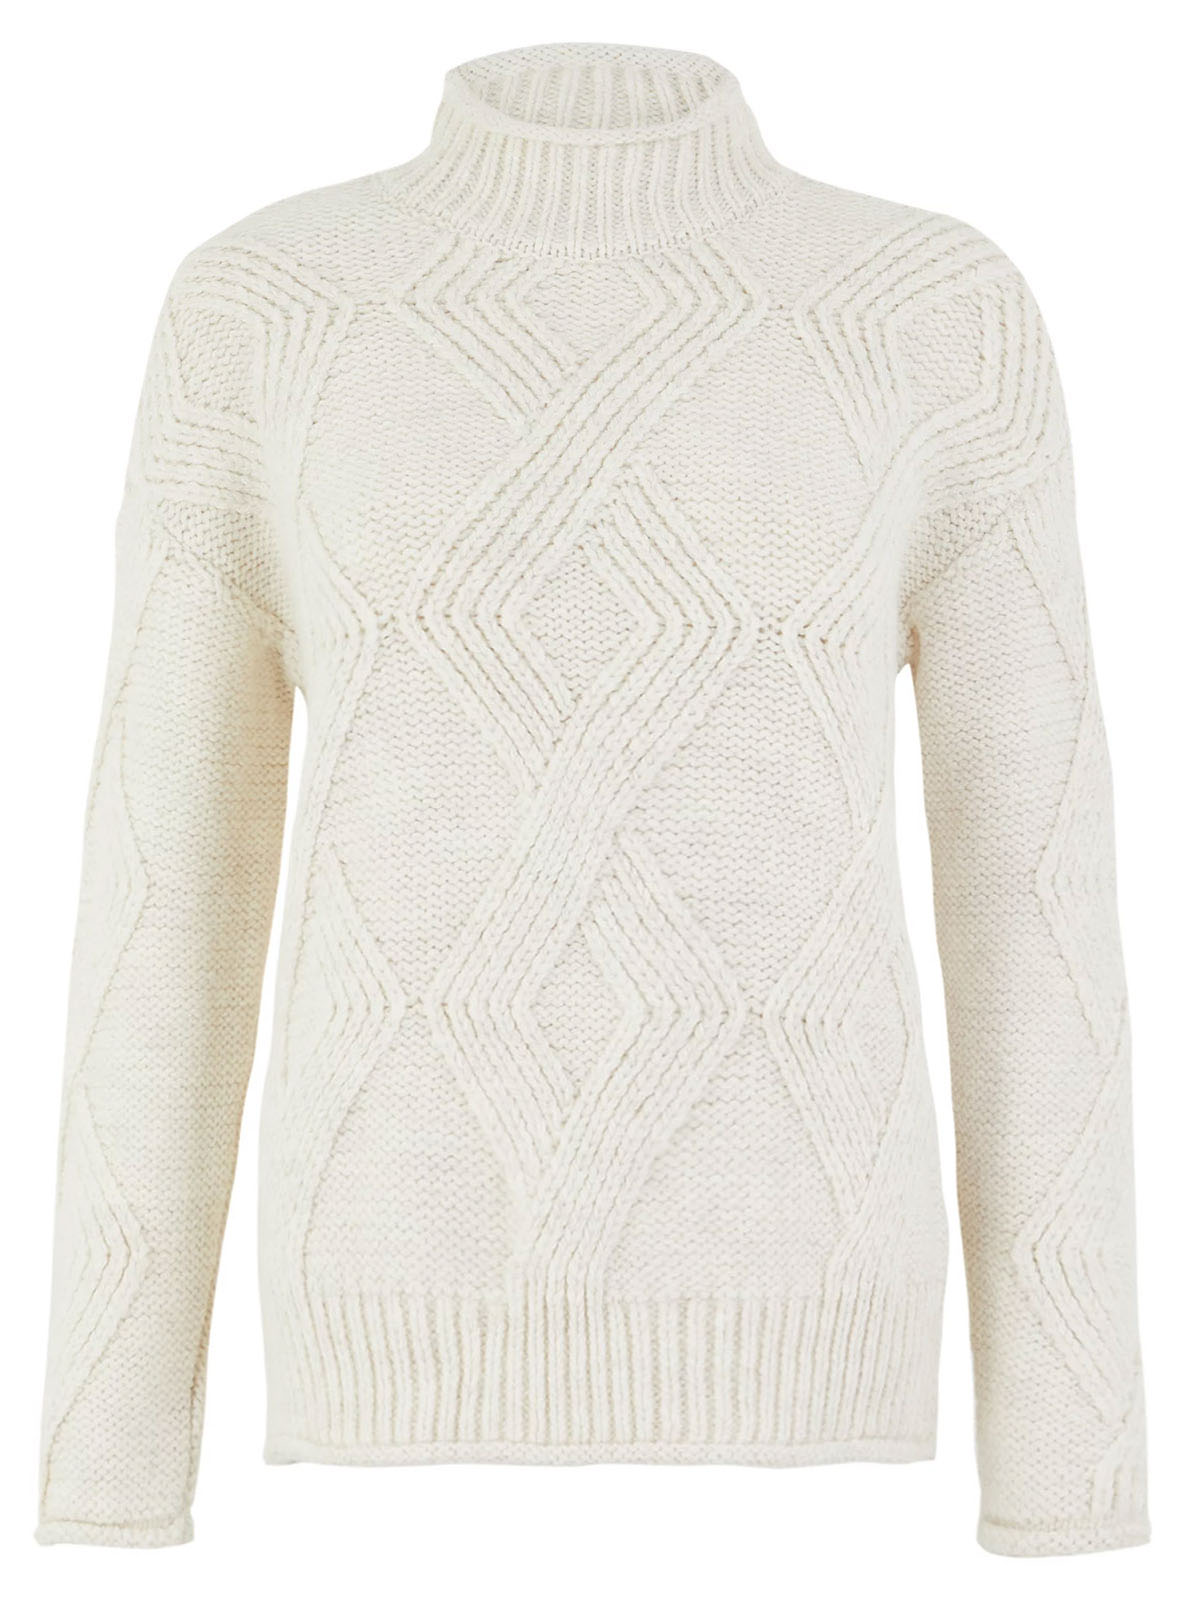 Marks and Spencer - - M&5 CREAM Argyle Cable Knit Turtle Neck Jumper ...